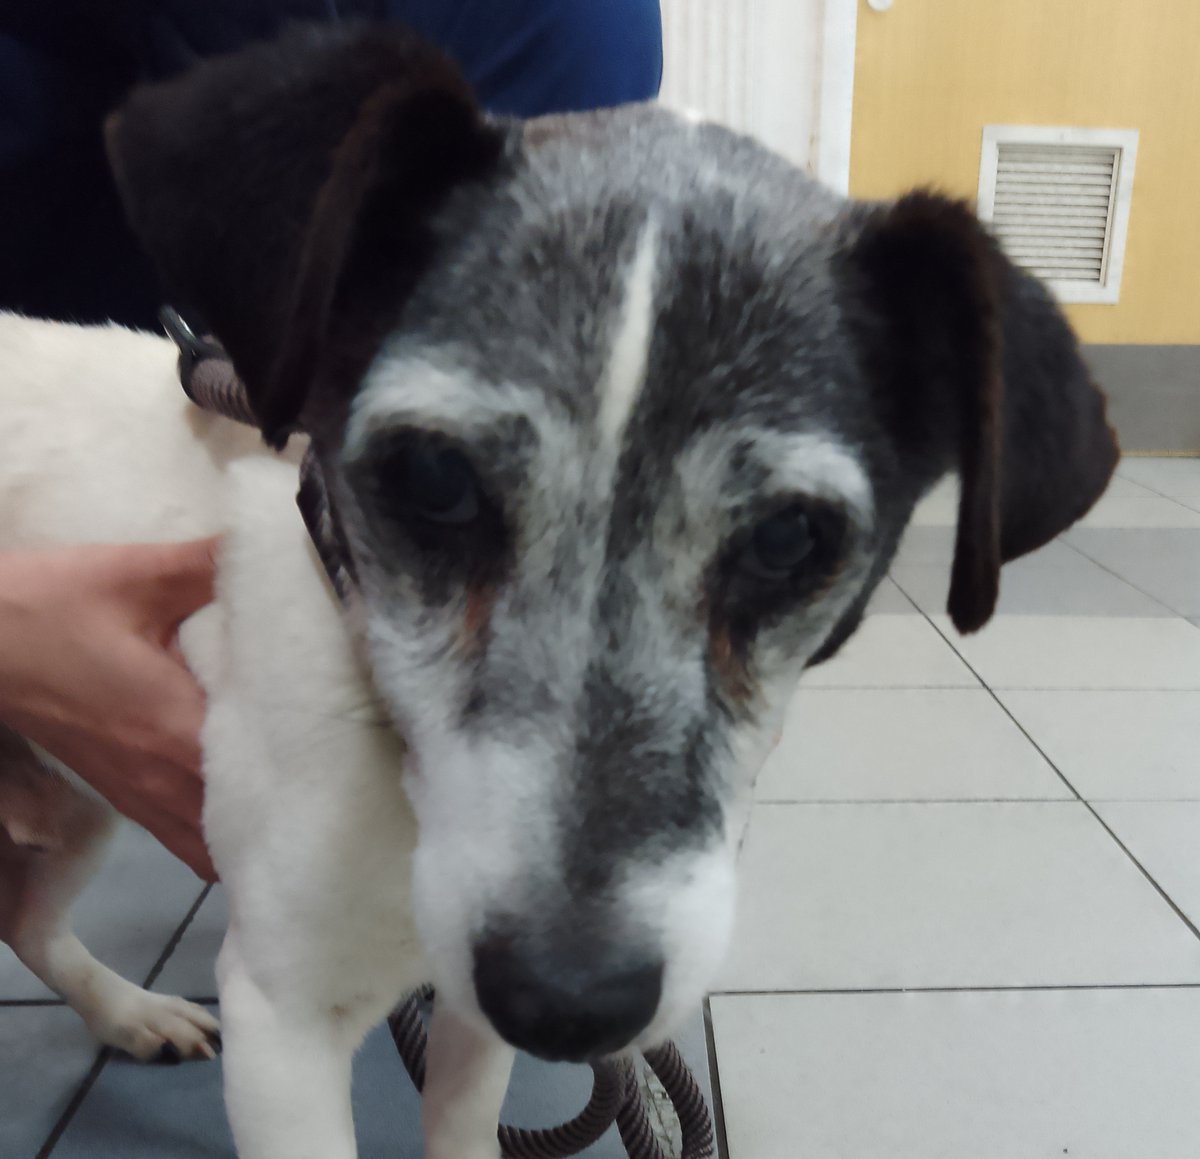 Please retweet to HELP FIND THE OWNER OR A RESCUE SPACE FOR THIS FOUND / ABANDONED DOG #GREENWICH #LONDON #UK Male Parsons Terrier, chip not registered, found 5 may. Now in a council pound for 7 days, he could be missing or stolen from another region. Proof of ownership required.…